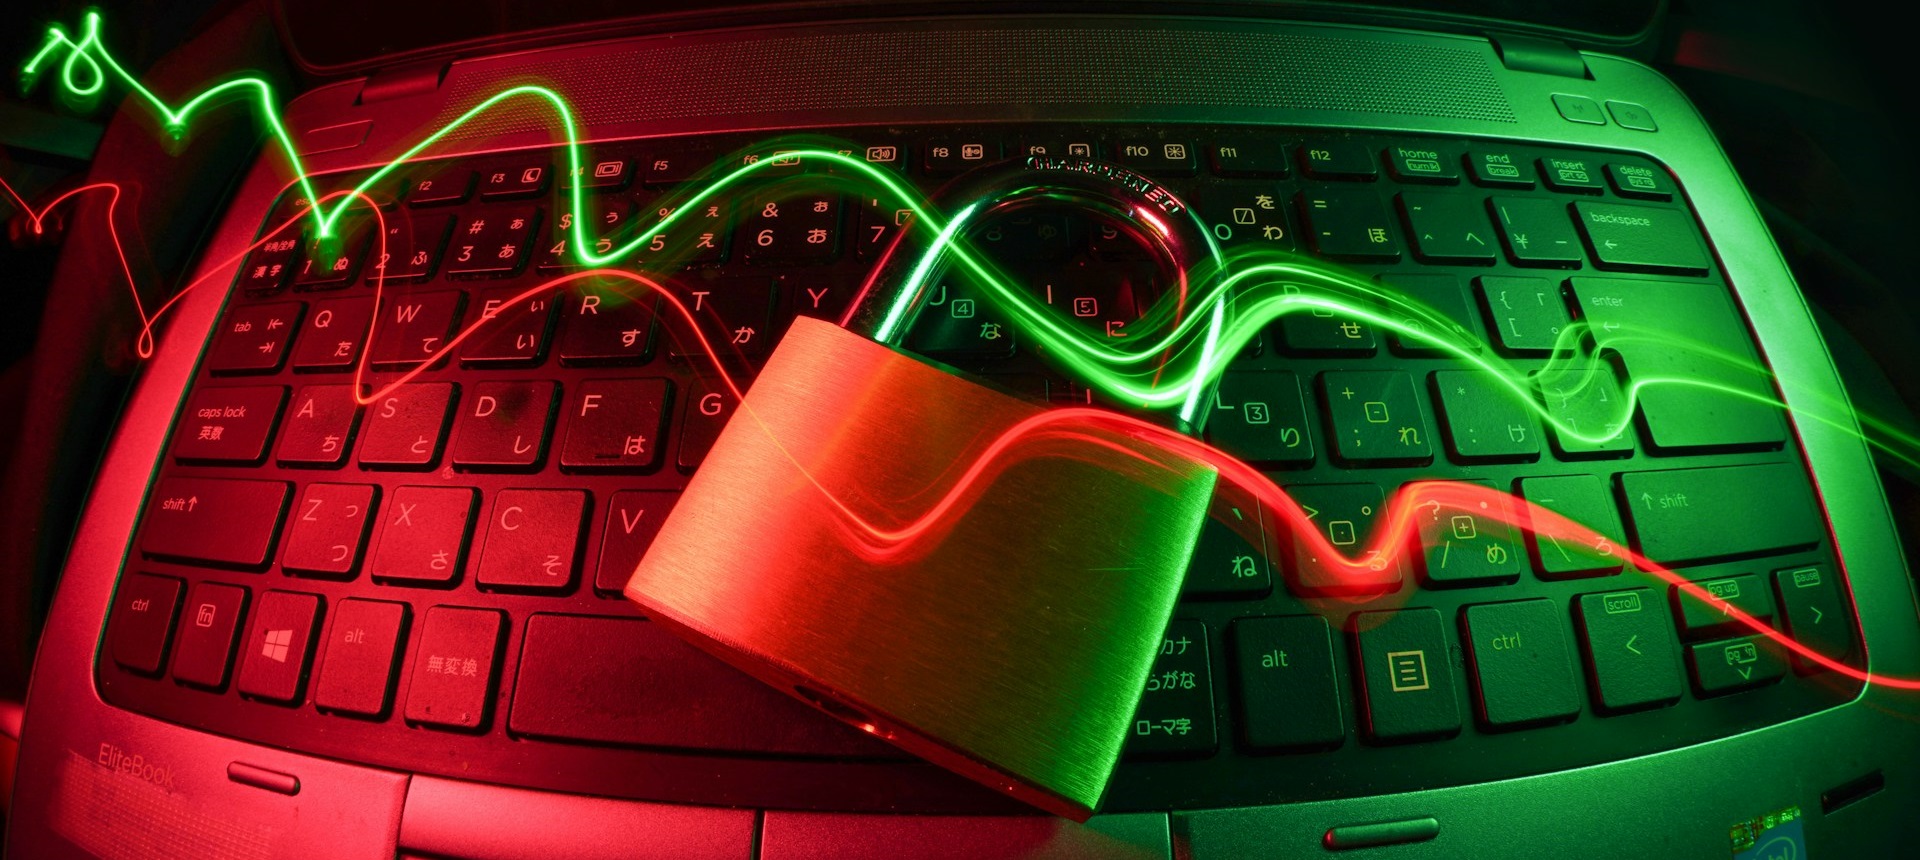 Computer keyboard overlaid with wavy beams of green and red light and a padlock. Photo by FlyD on Unsplash